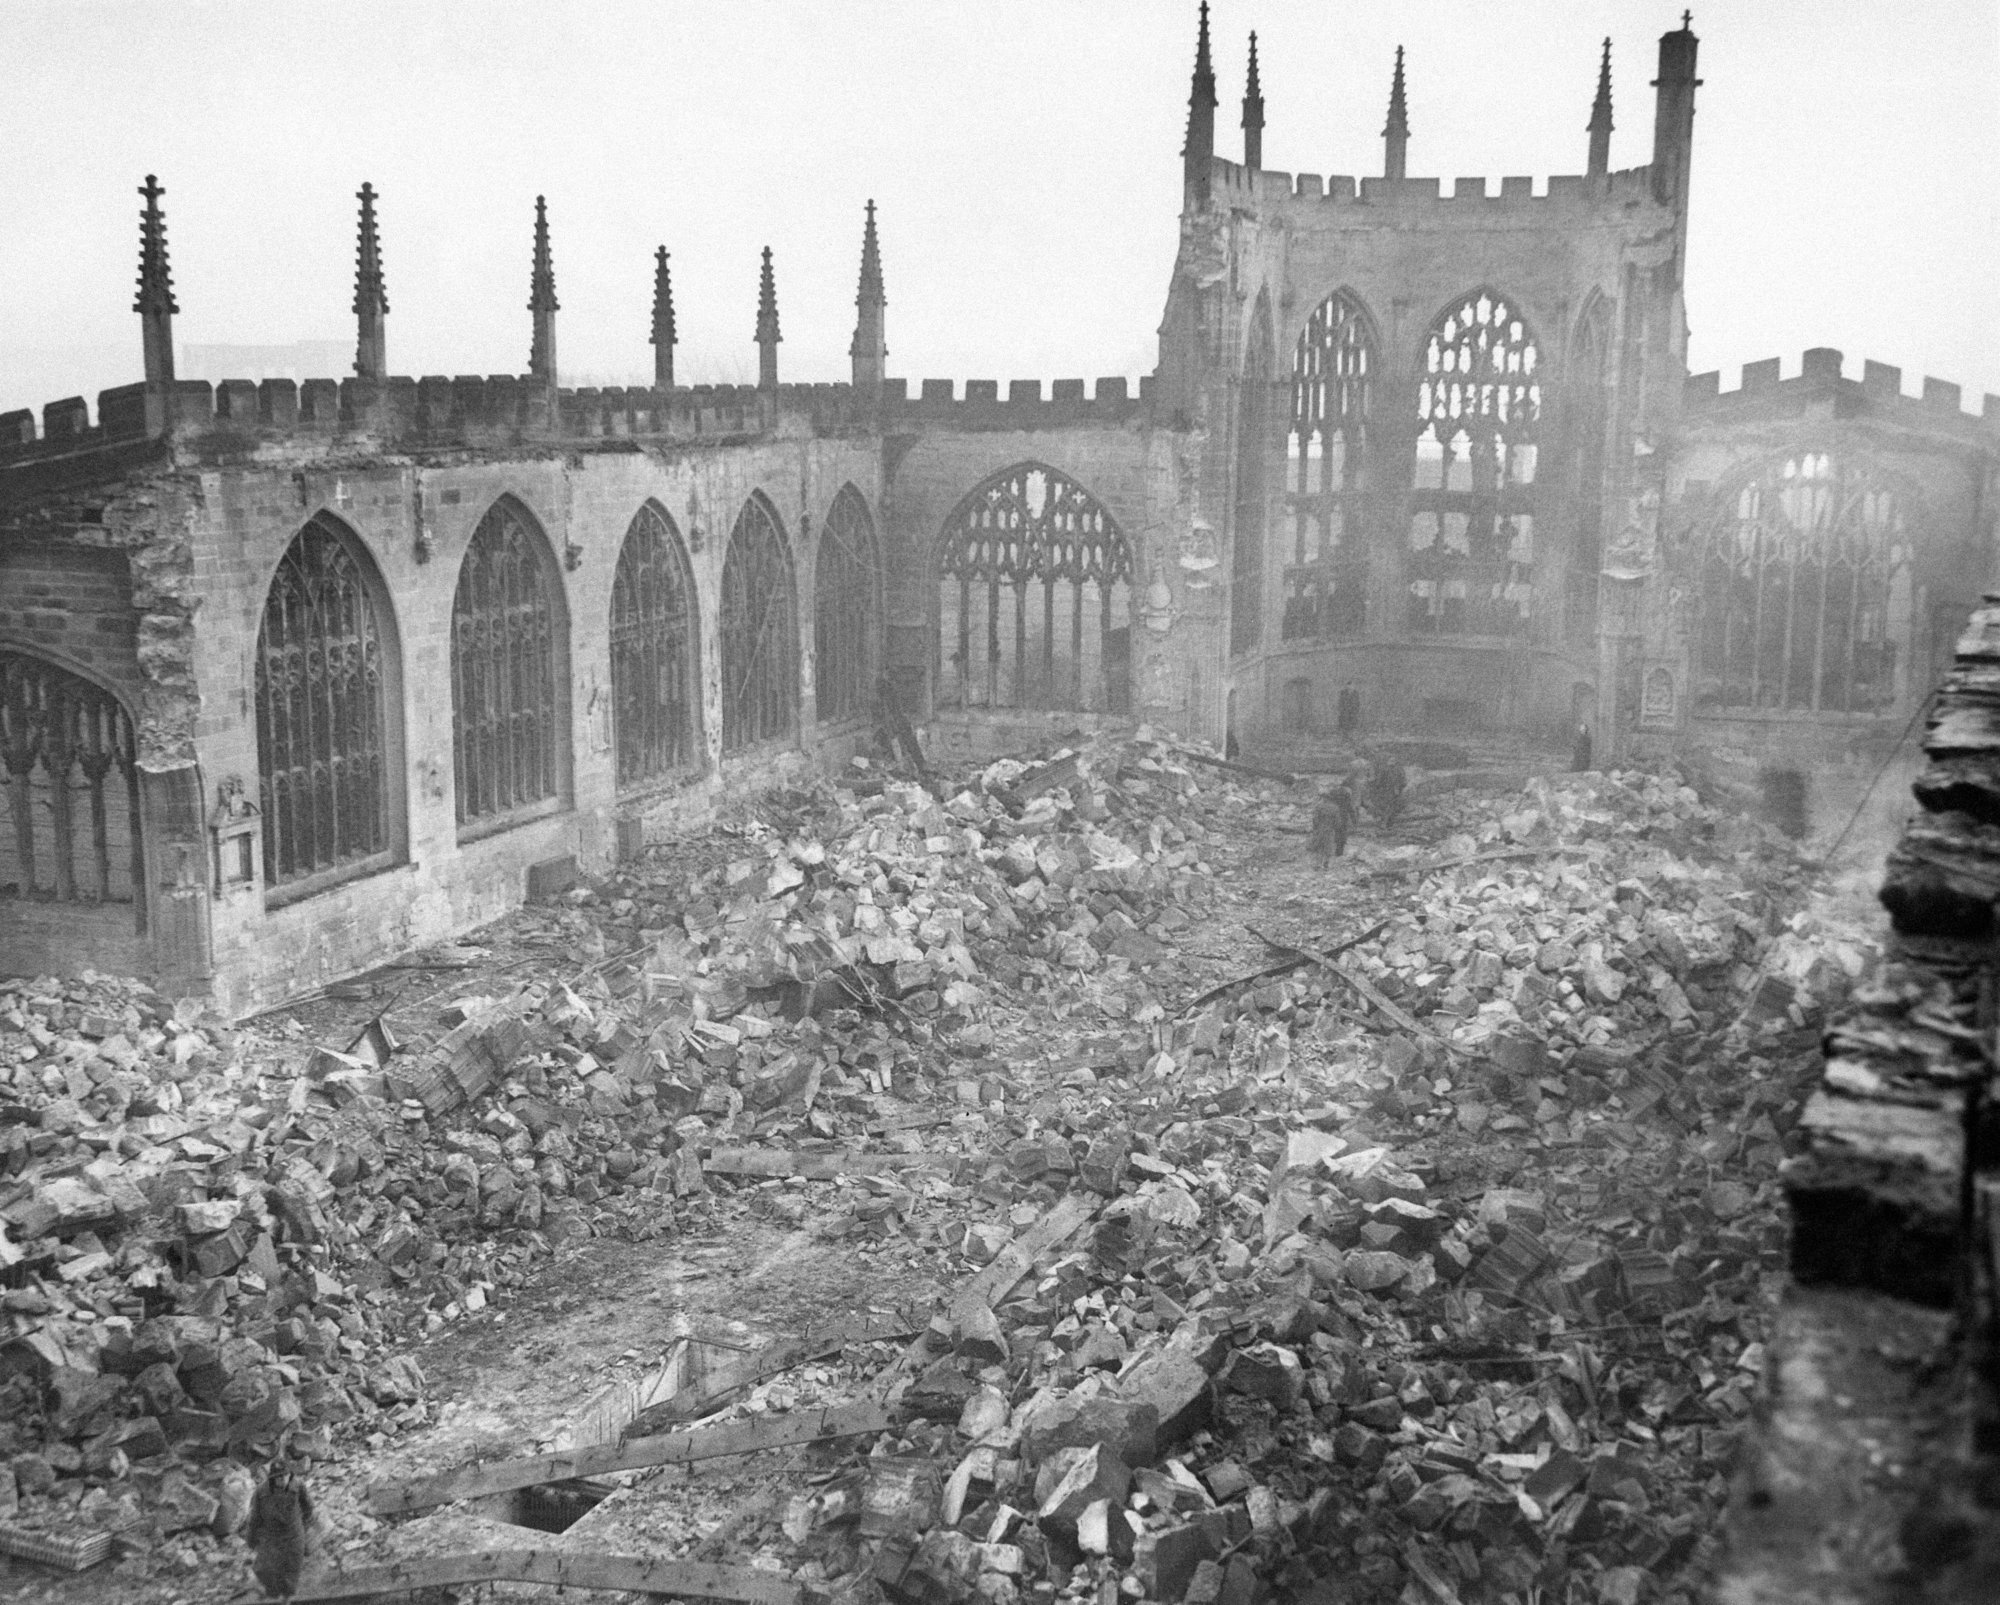 All that now remains of the beautiful cathedral, following the large-scale Nazi raid on the midland city in Coventry, England, Dec. 9, 1940. Just the walls remain of the body of the nearly 500 years old building. (AP Photo)